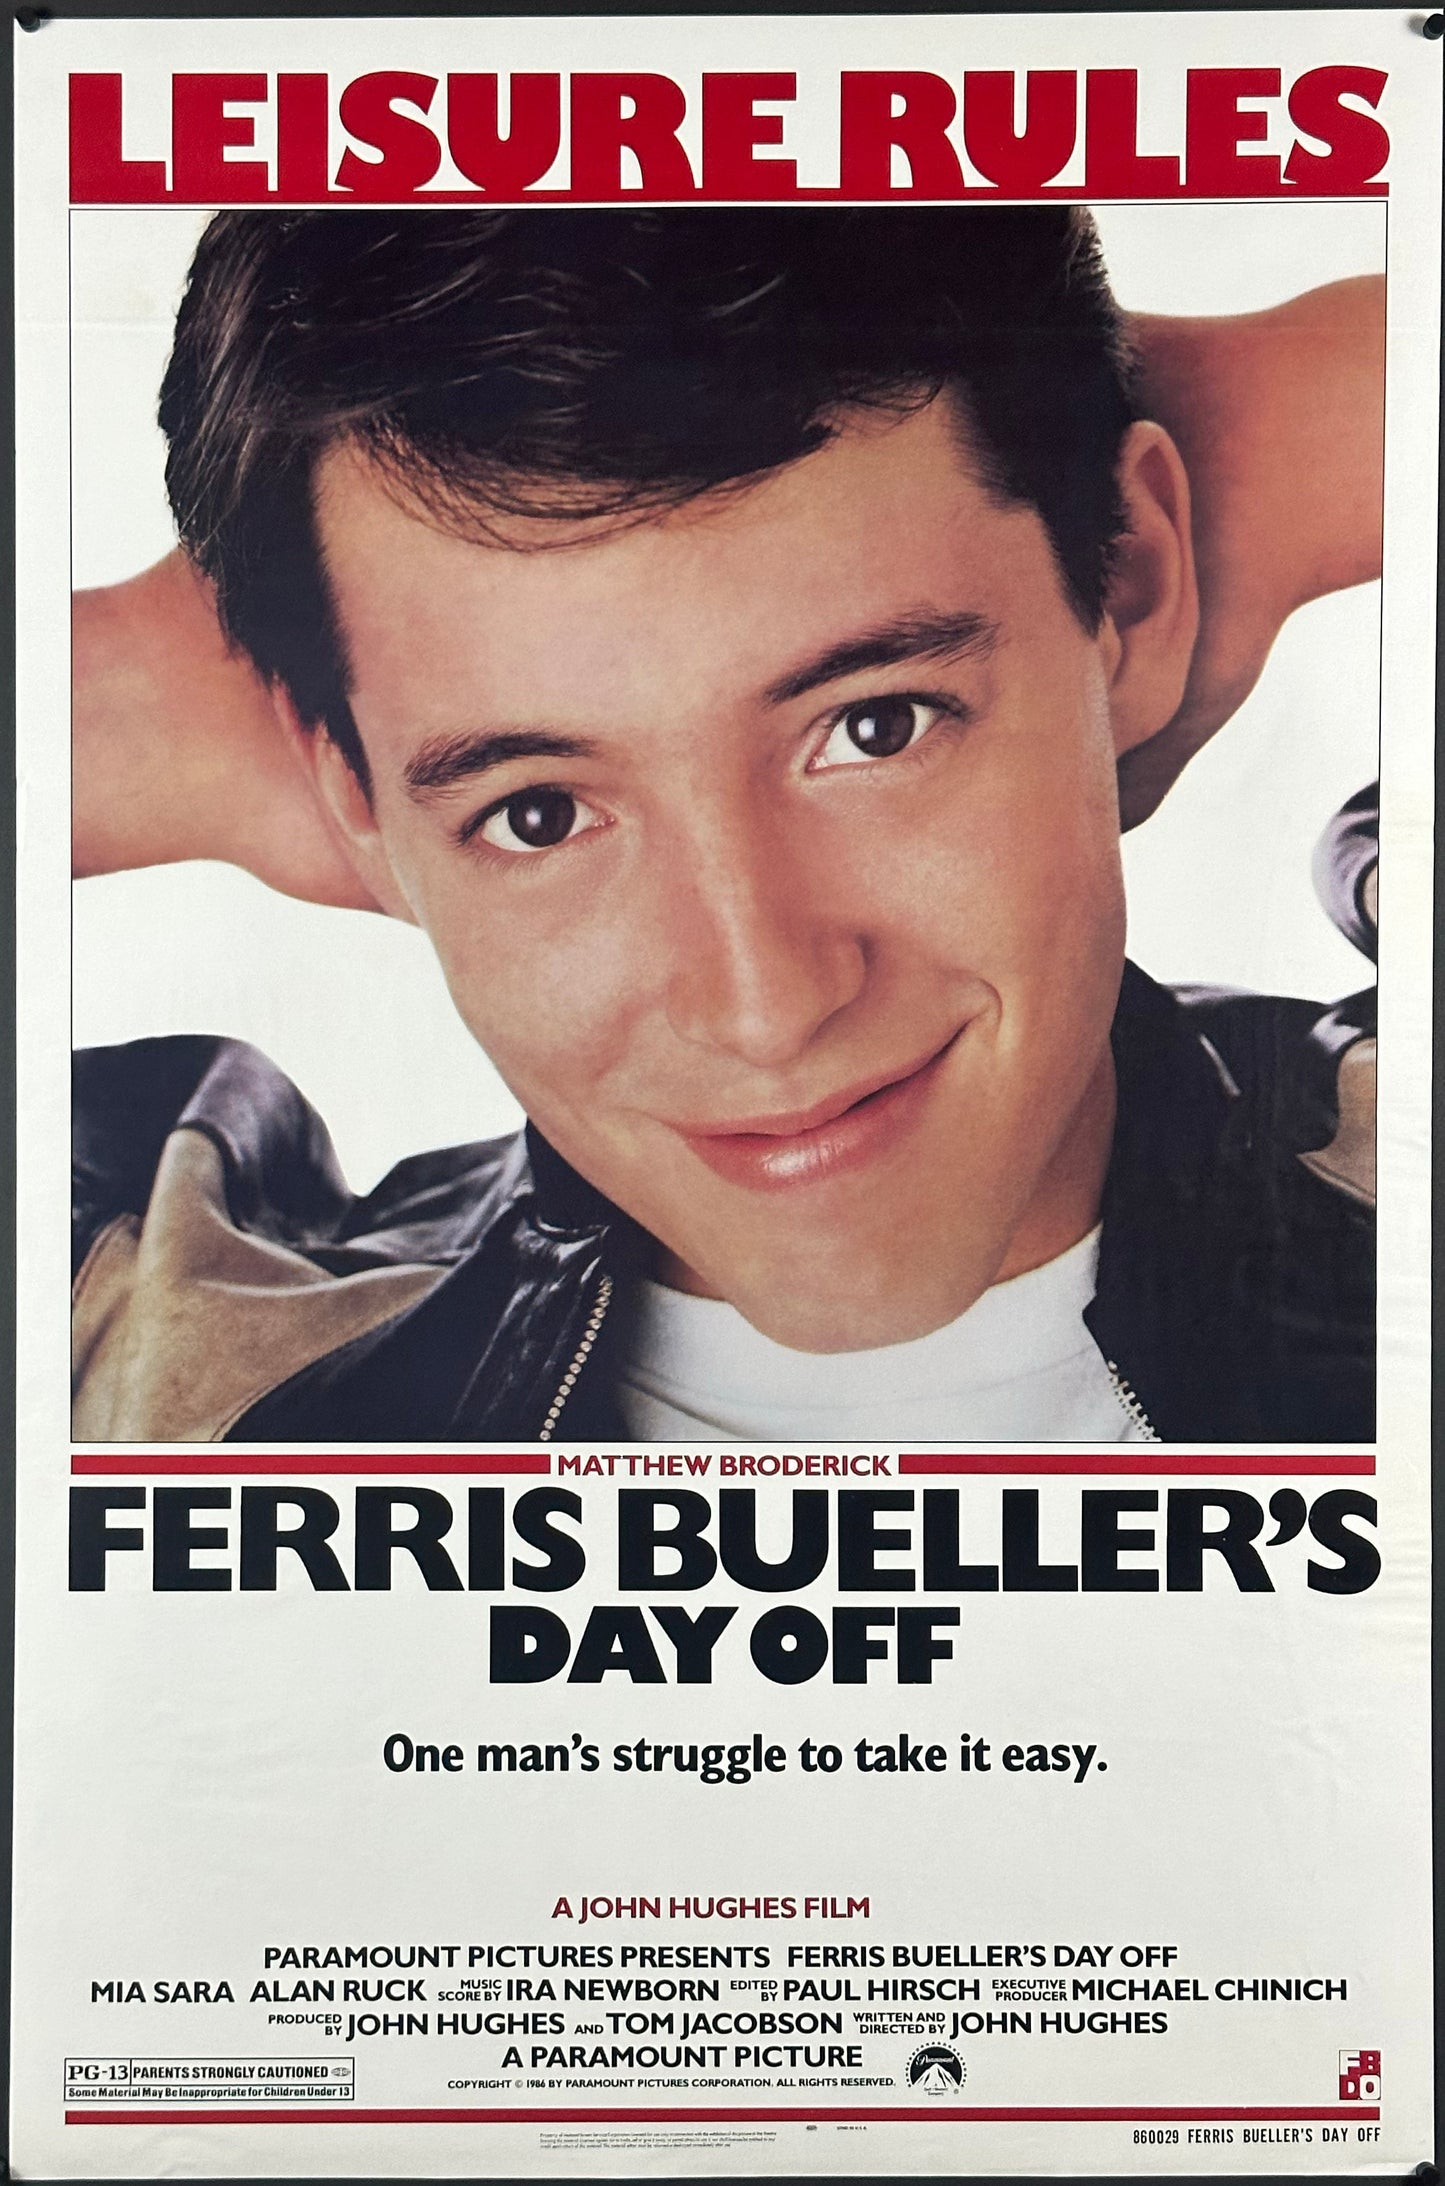 Ferris Bueller's Day Off - posterpalace.com